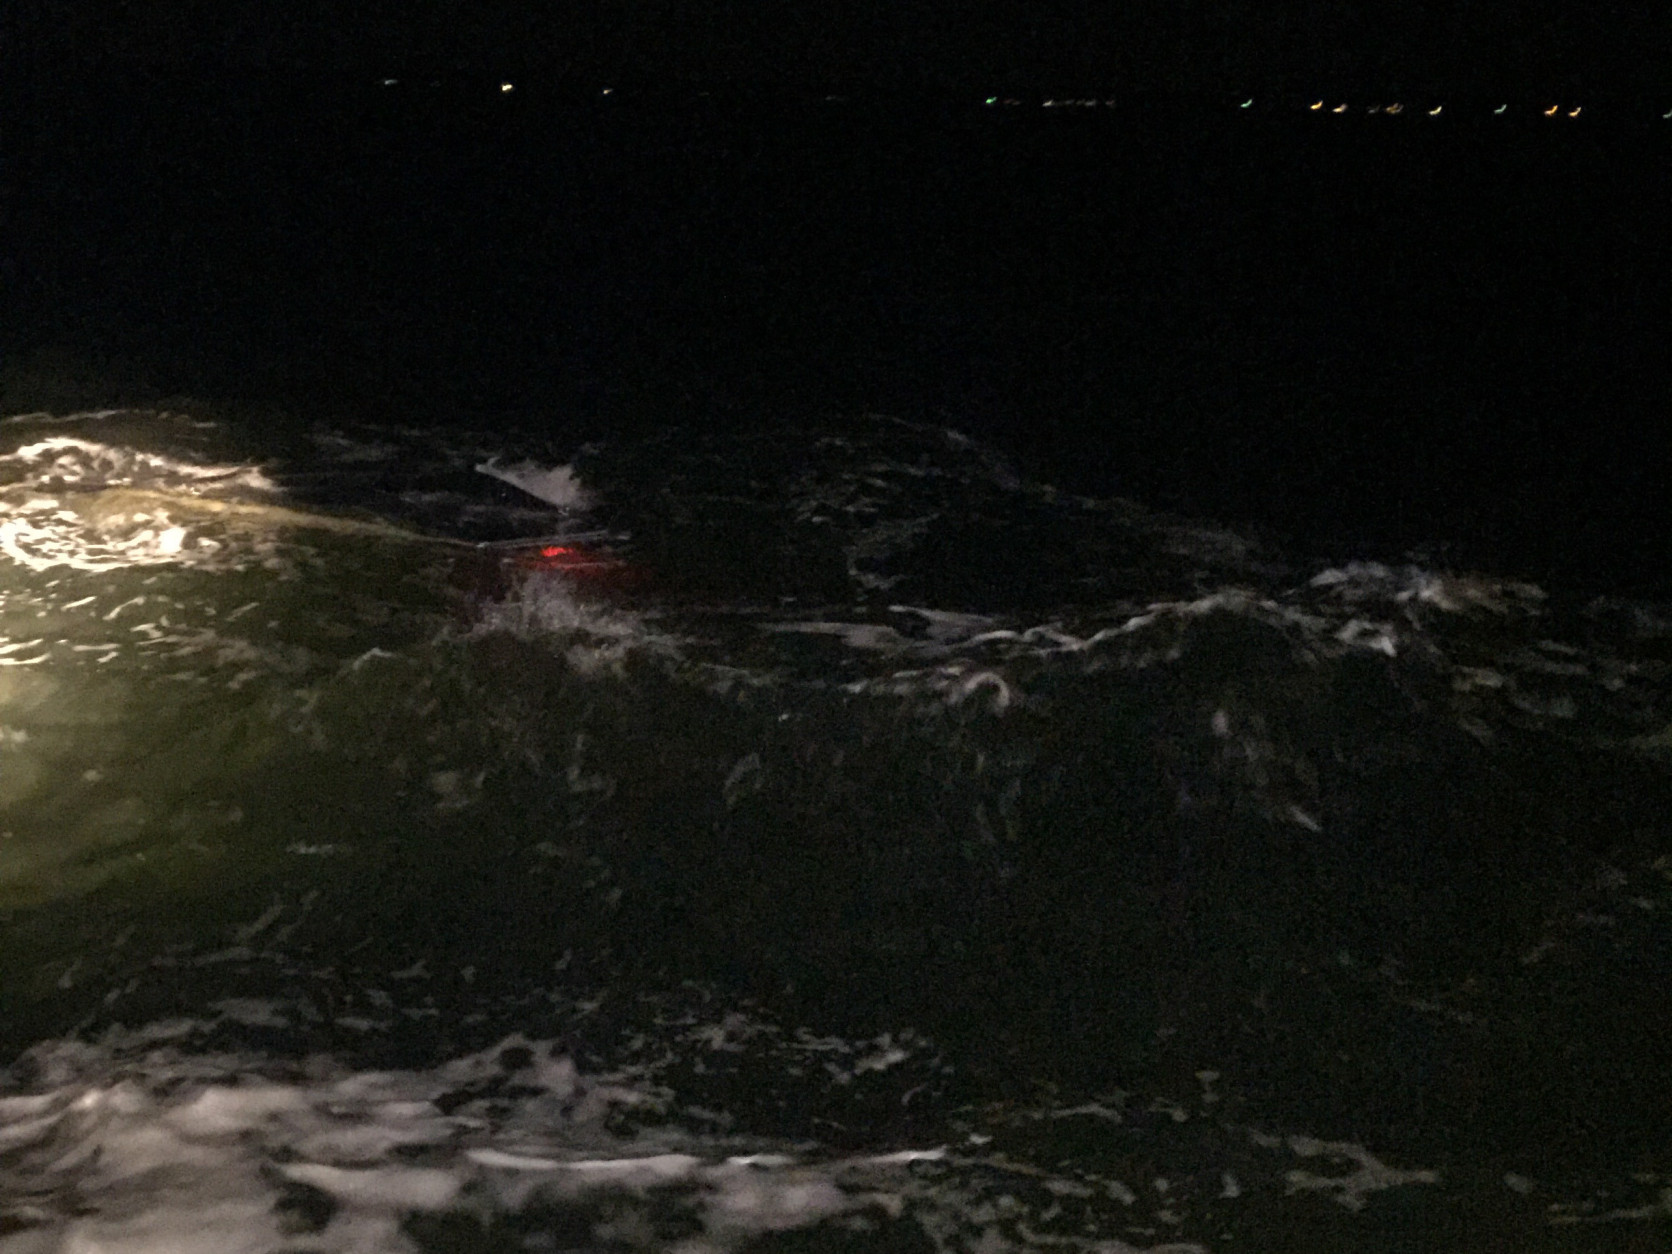 Pictured here is a 15-foot Glass Stream boat, which capsized with two boaters aboard in the Potomac River, Sunday, Dec. 20, 2015. Members of the St. Mary’s County Sheriff’s department rescued the two boaters with a coordinated effort involving Coast Guard Sector Baltimore and a Maryland State Police helicopter crew. (U.S. Coast Guard photo)